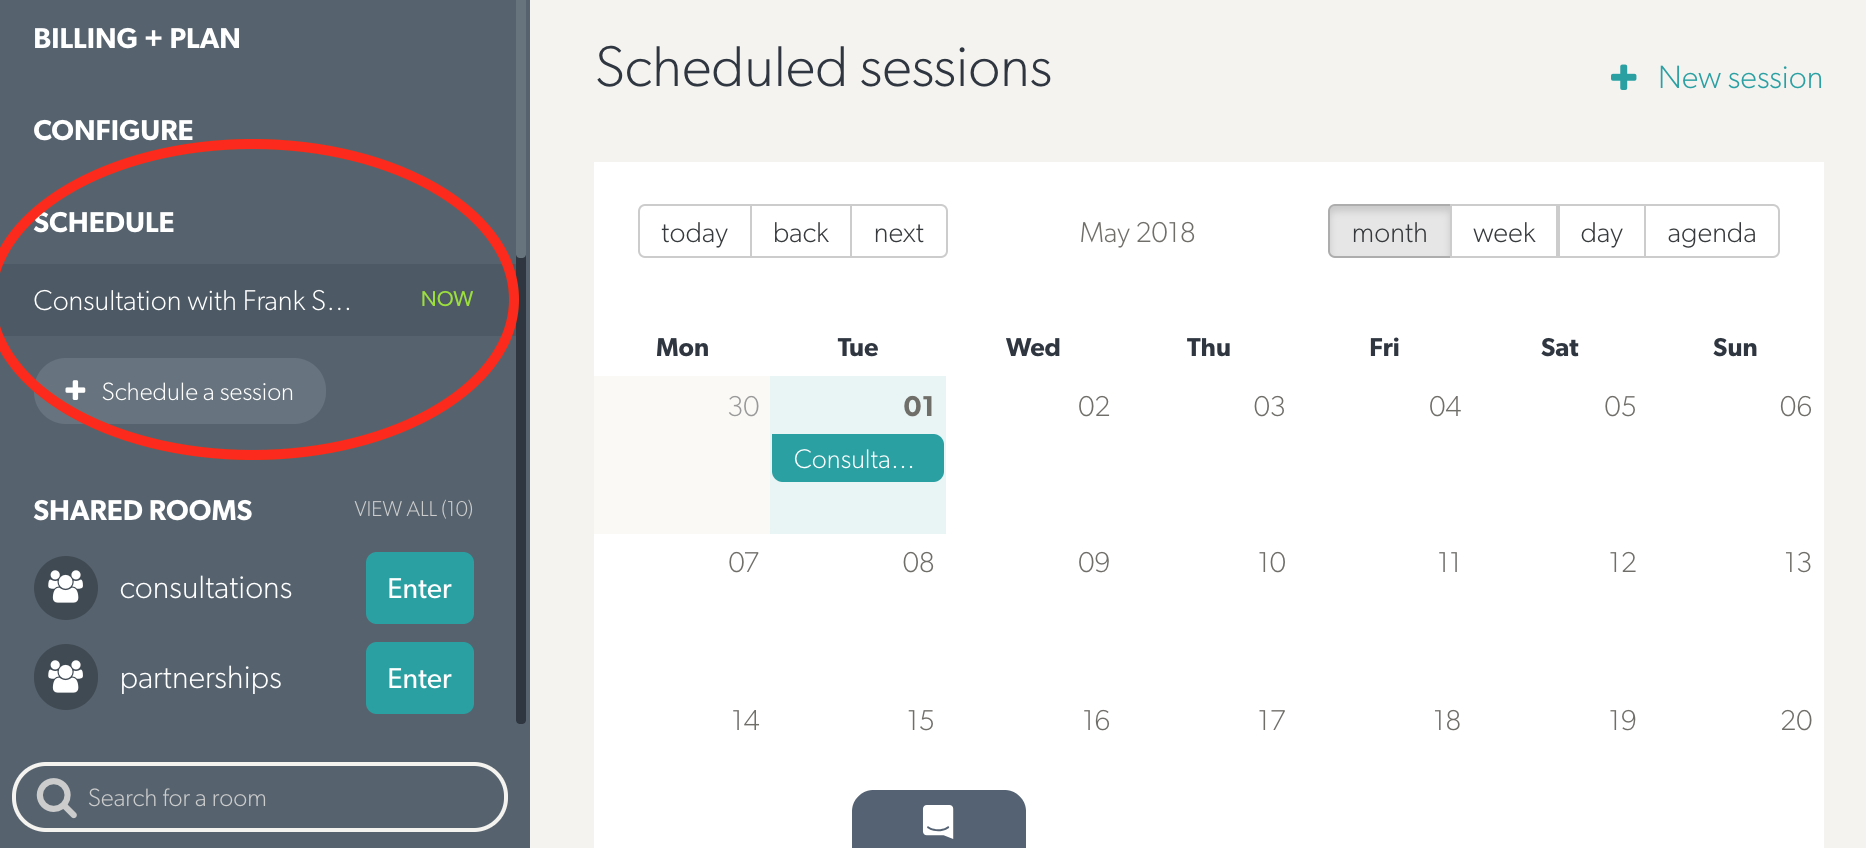 Session Scheduling